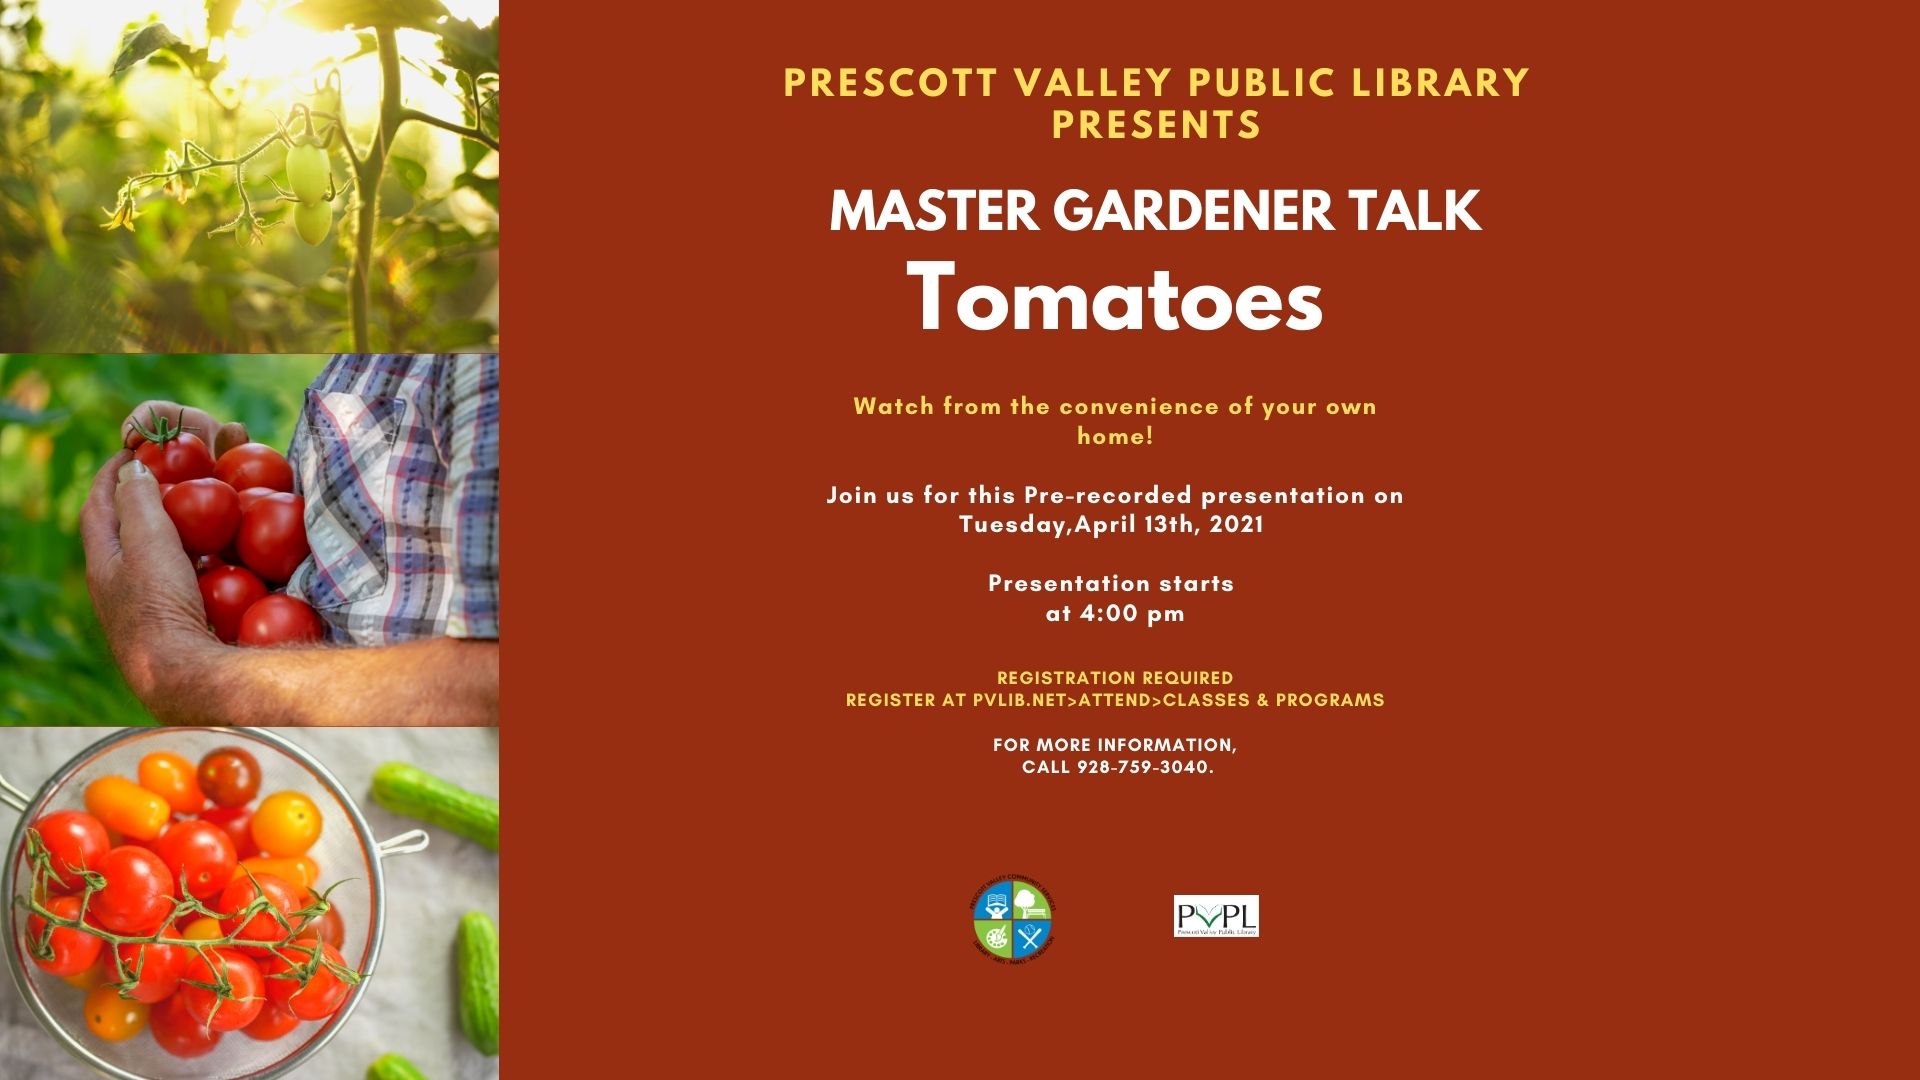 April 13th, 2021 Master Gardener: Tomatoes – Registration Required – Virtual Pre-recorded